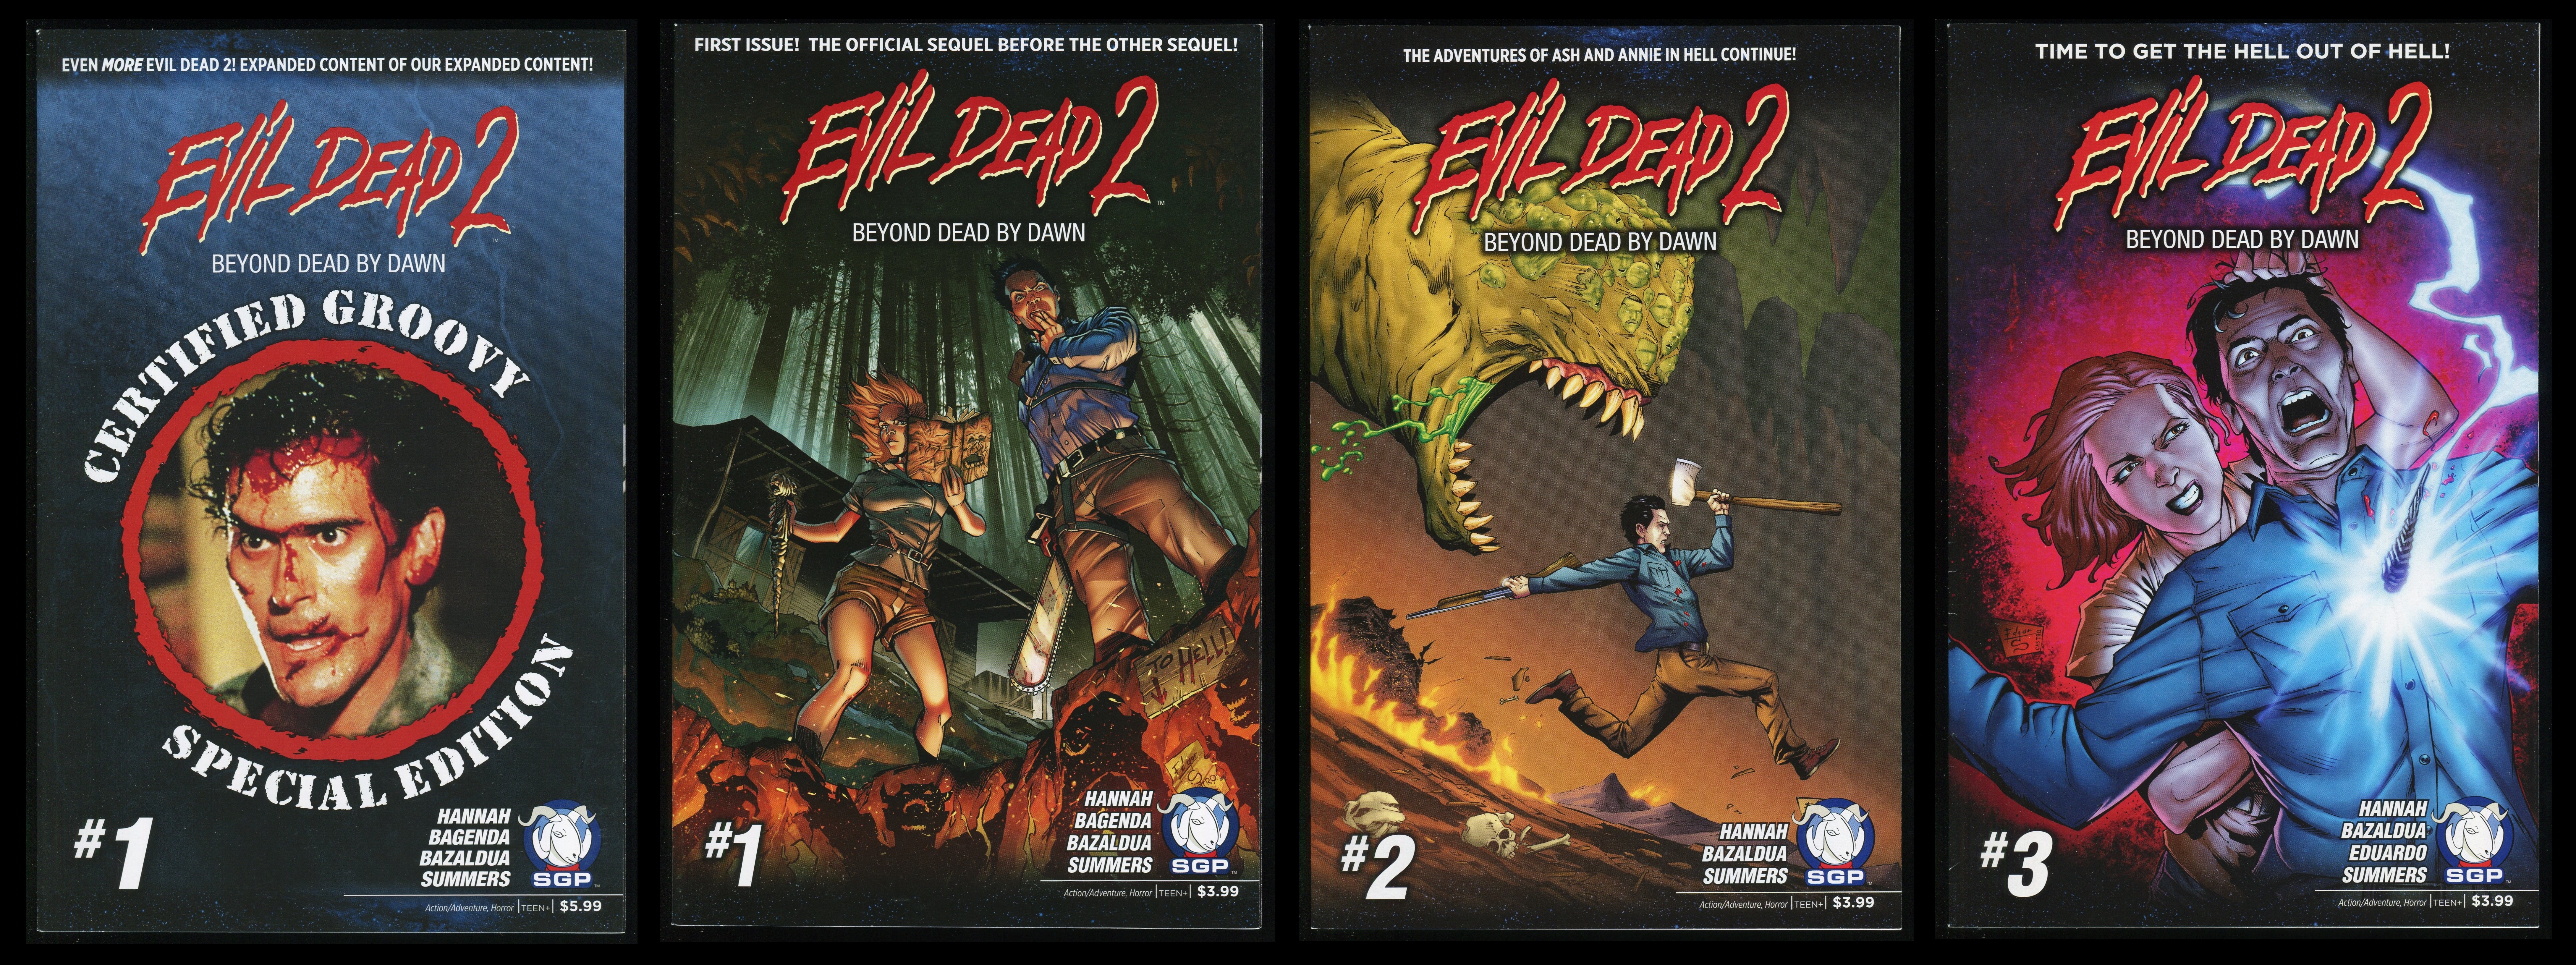 The Evil Dead 1 + 2